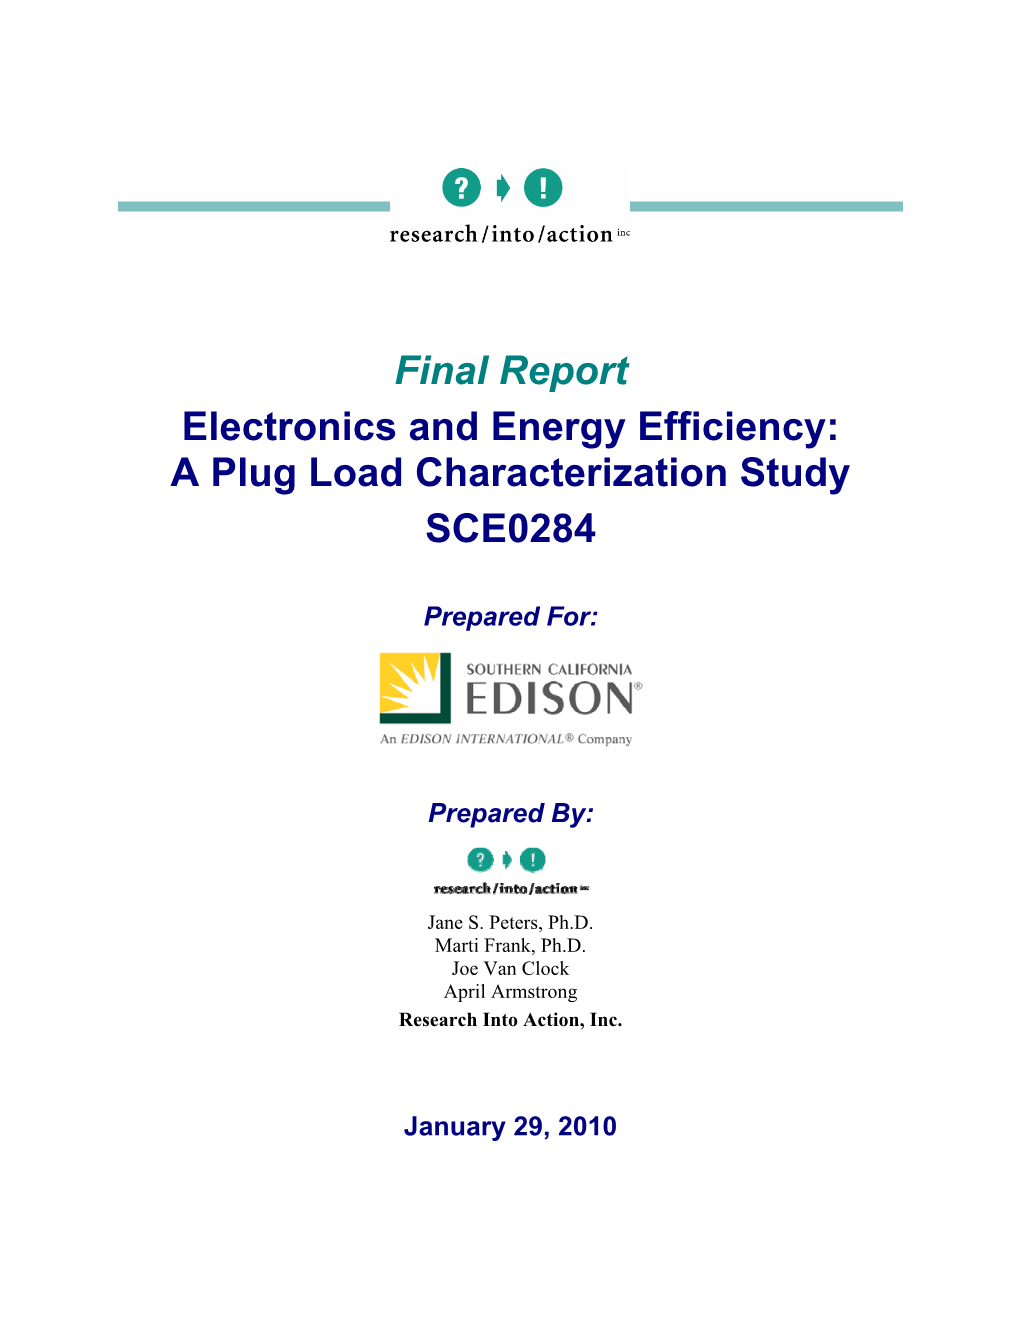 Electronics and Energy Efficiency: a Plug Load Characterization Study SCE0284